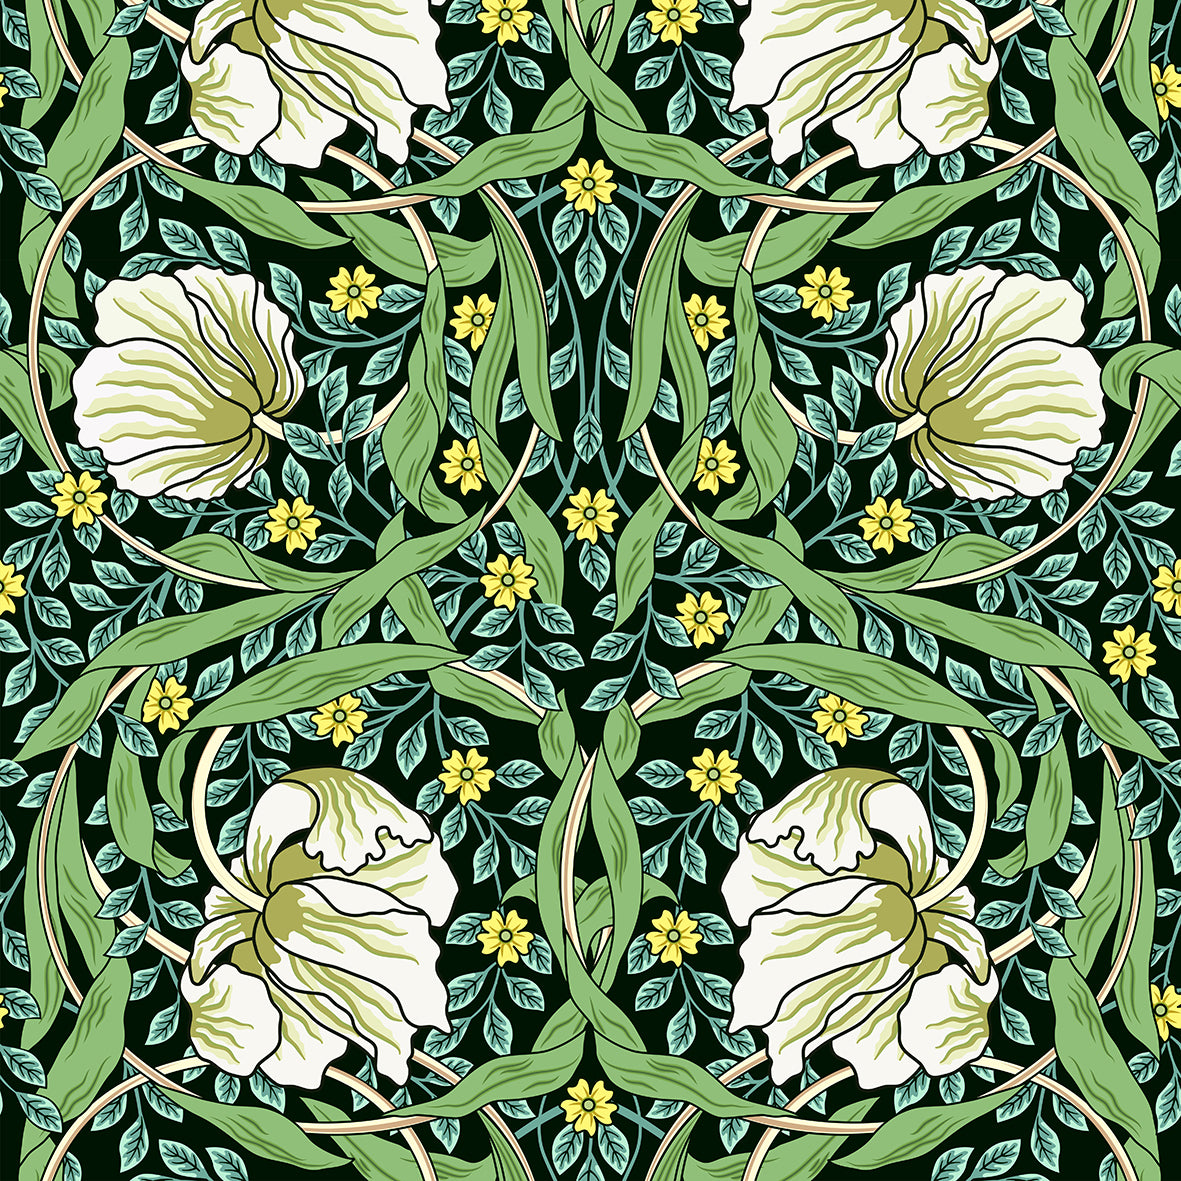 william-morris-co-face-cloth-pimpernel-collection-green-5